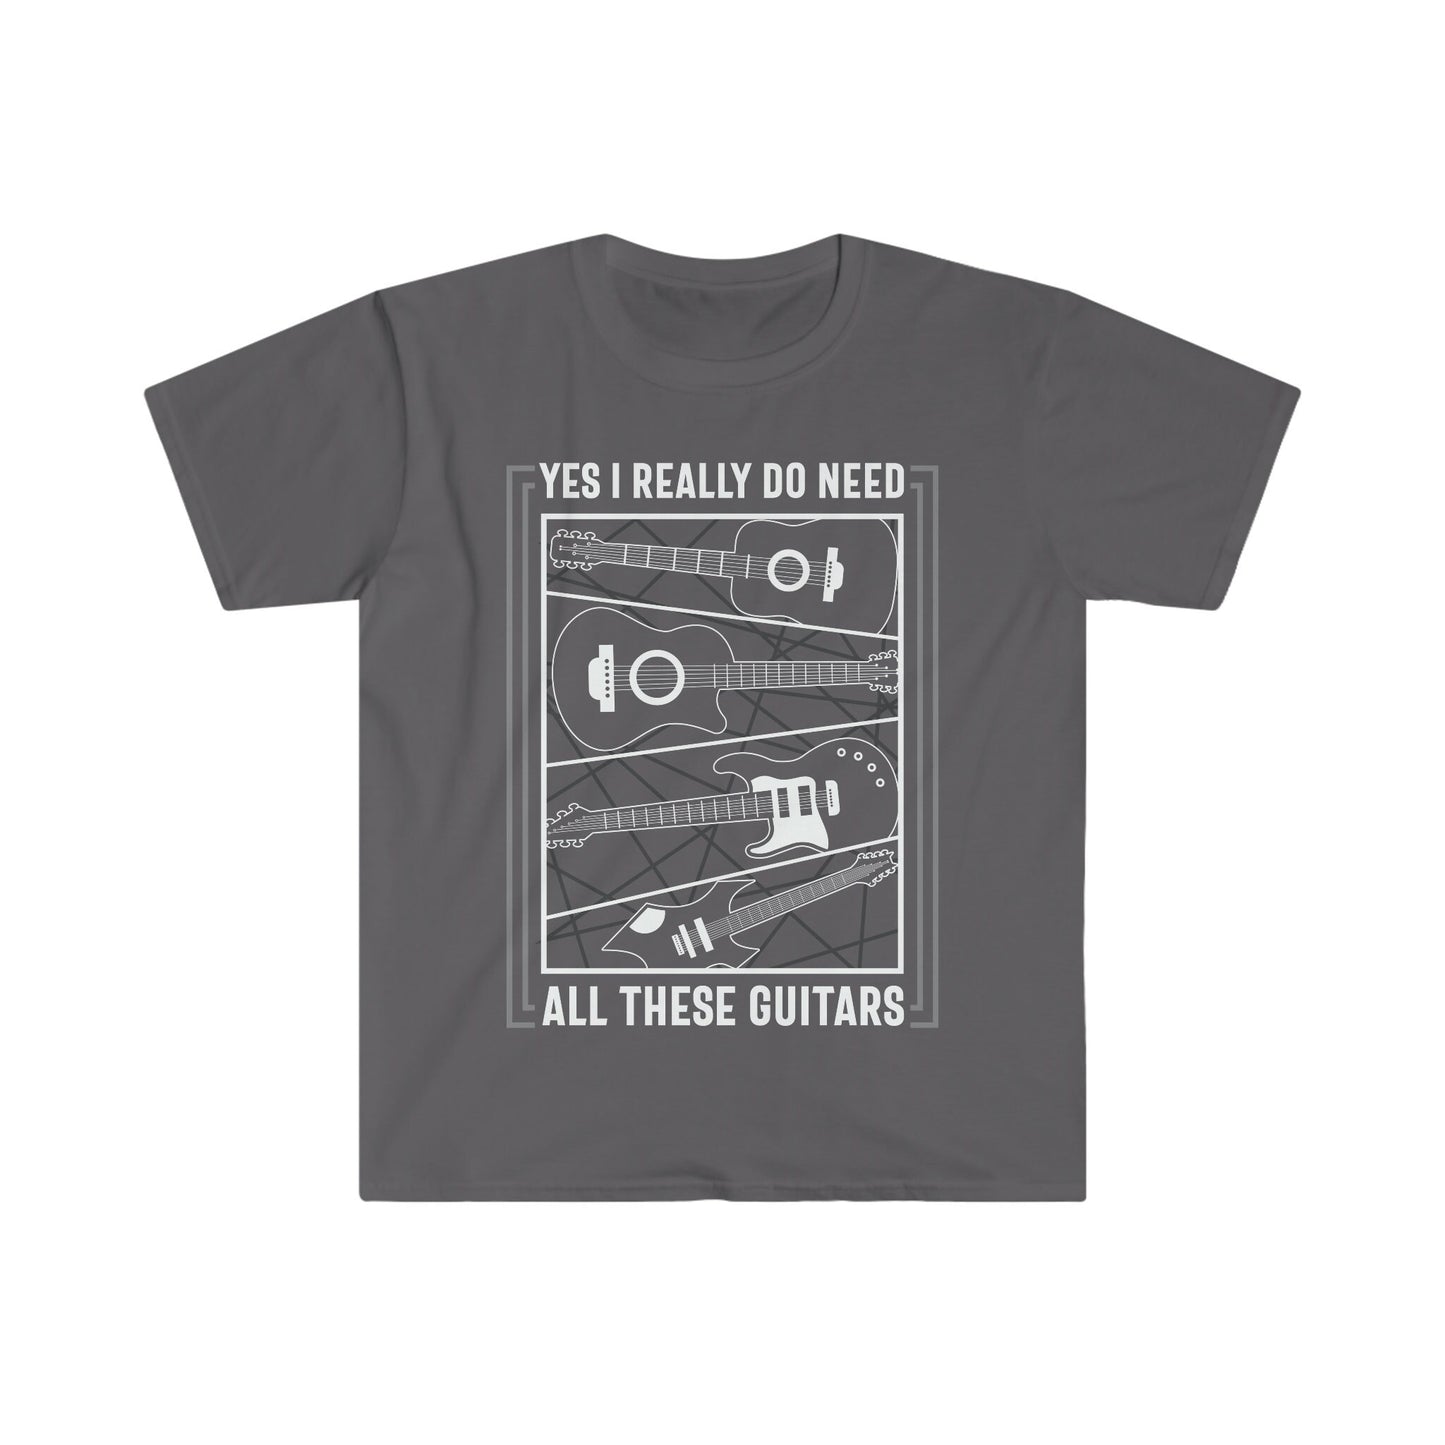 Yes, I Really Do Need All These Guitars - Unisex Softstyle T-Shirt